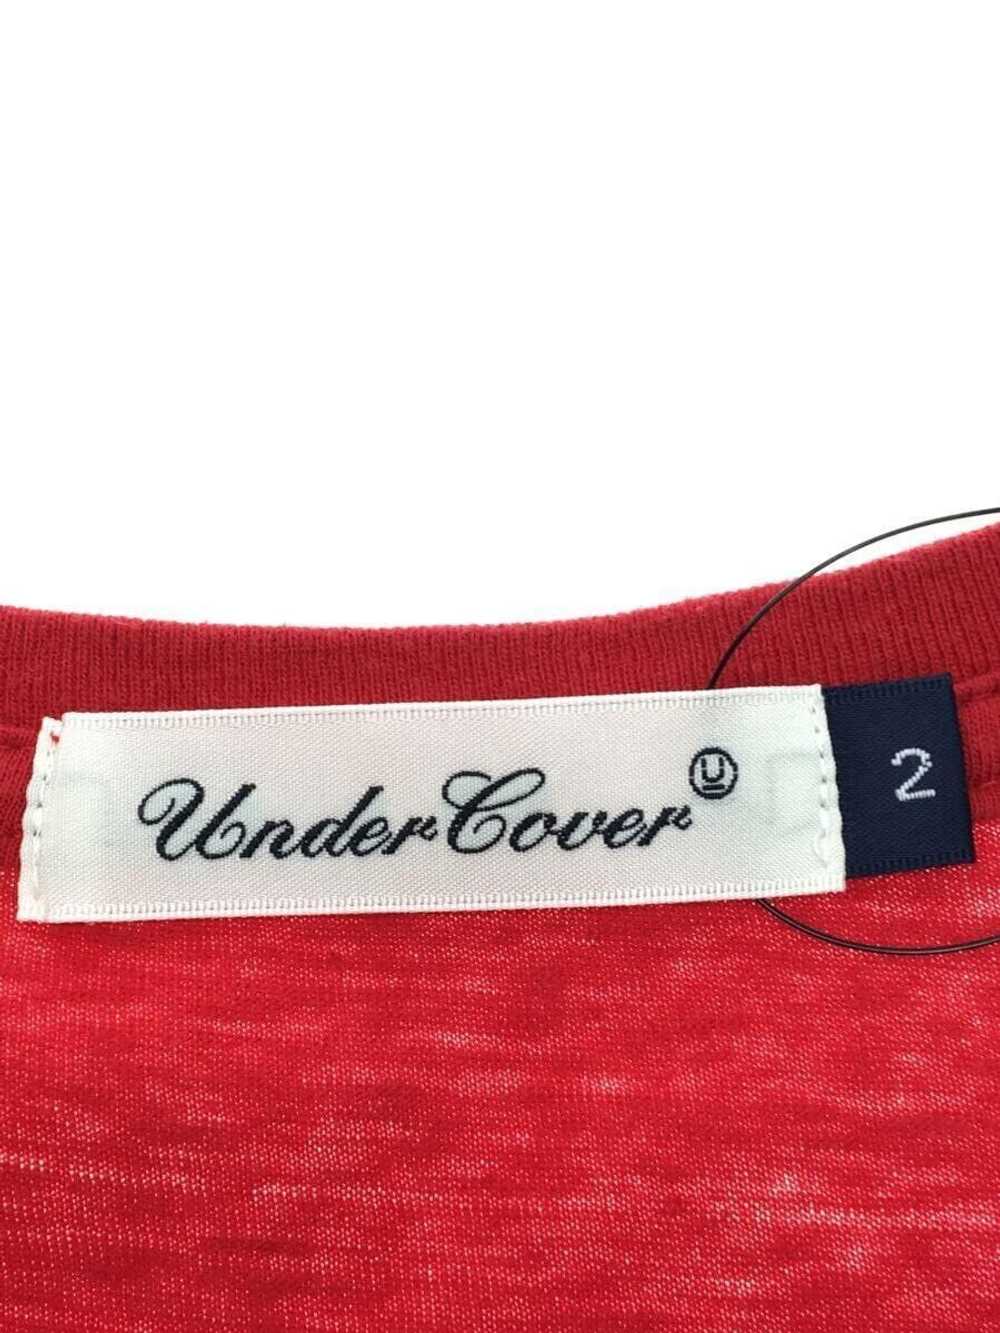 Undercover 🐎 Undercover Maniac T-Shirt - image 3